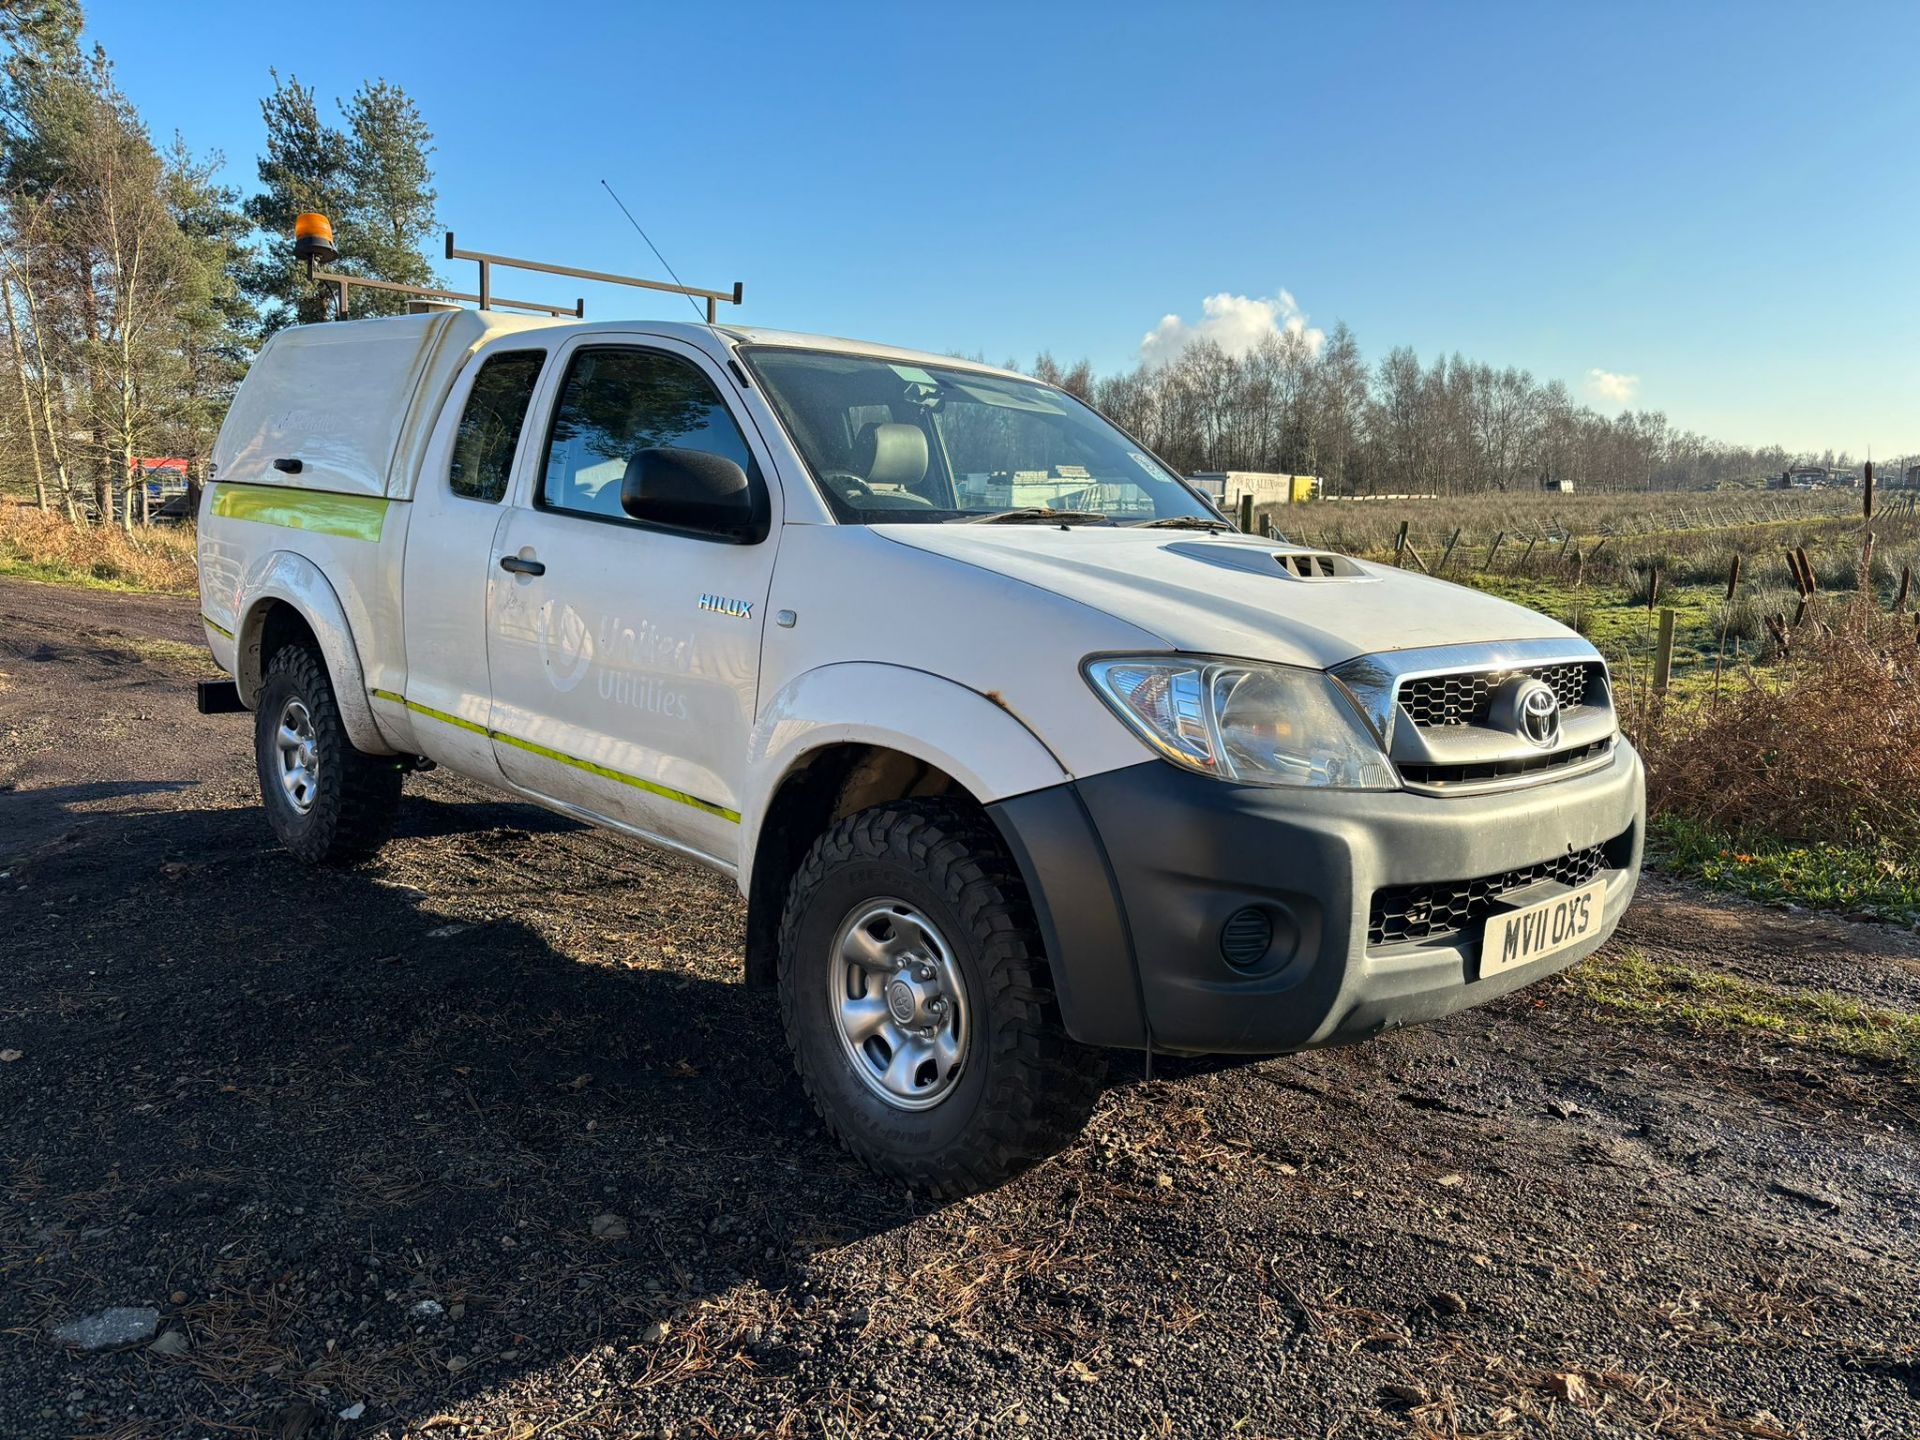 TOYOT HILUX 2011 KING CAB PICKUP TRUCK